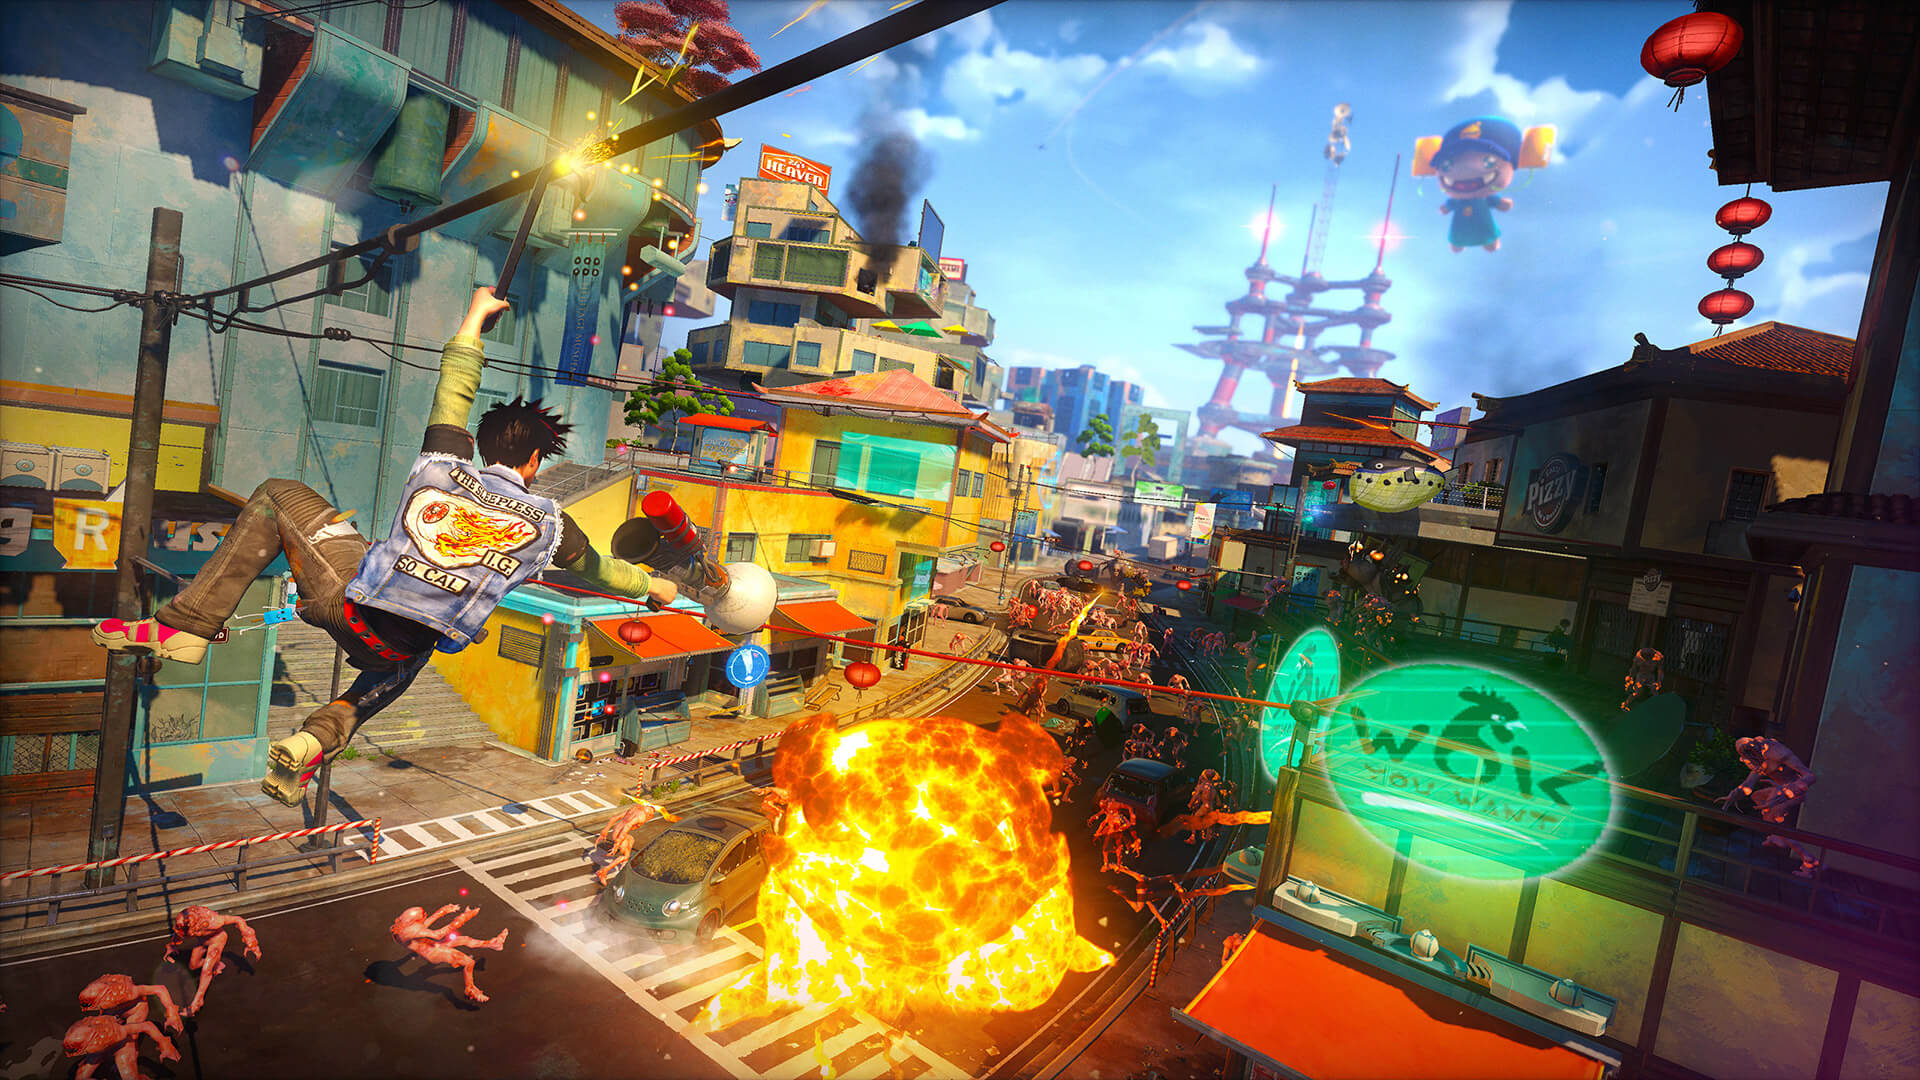 Sunset Overdrive on PC Is A Broken, Unoptimized Port.